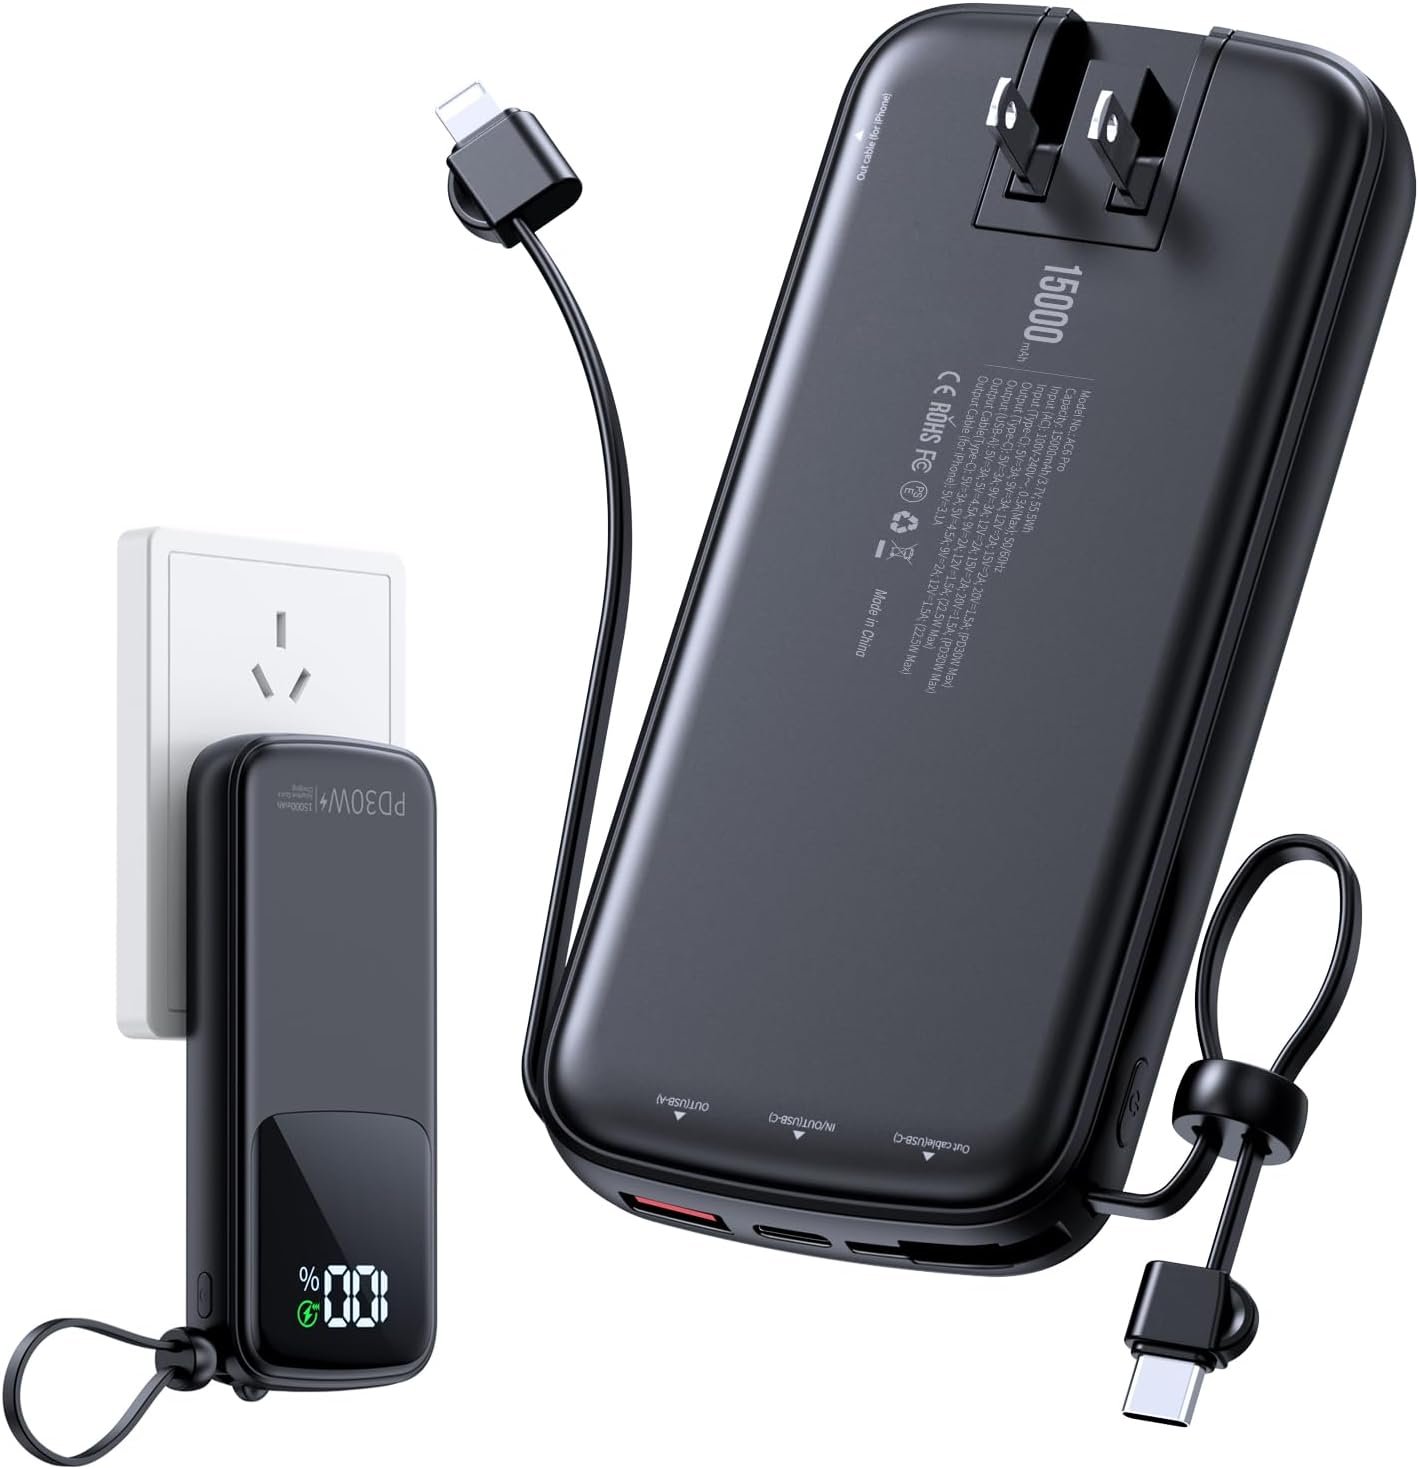 Portable Charger Power Bank – A Convenient Solution for Fast Charging on the Go